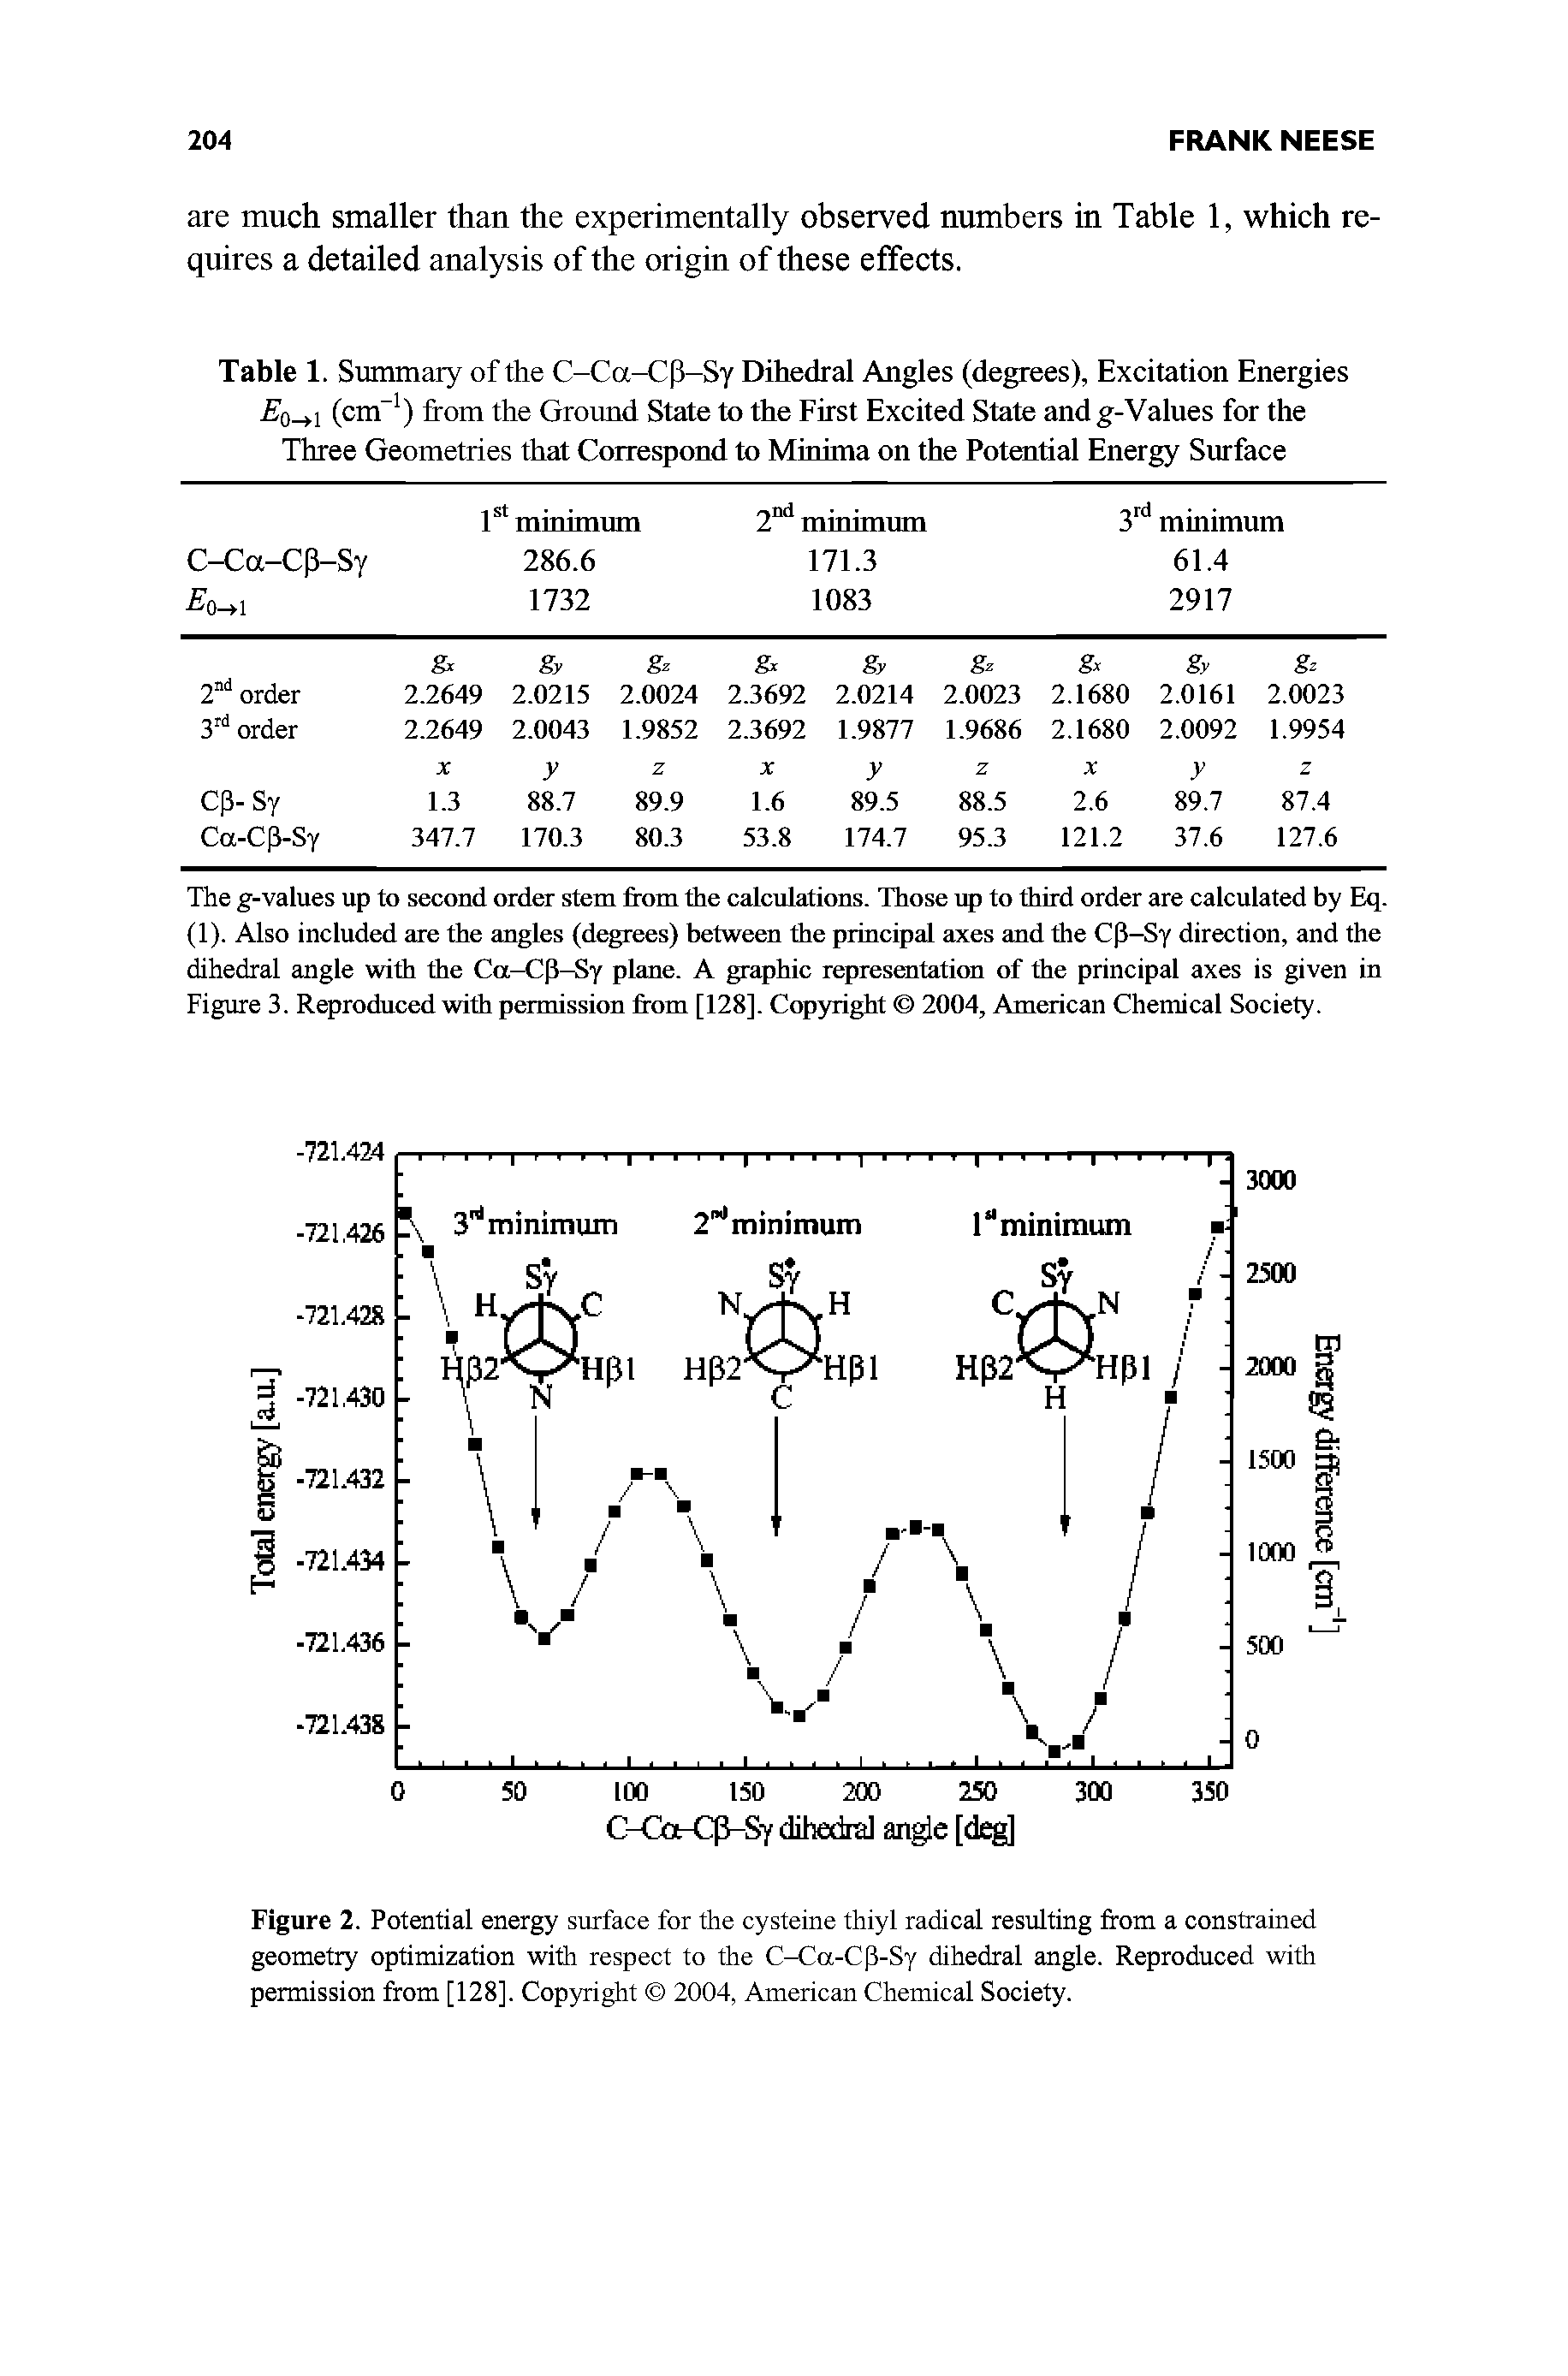 Figure 2. Potential energy surface for the cysteine thiyl radical resulting from a constrained geometry optimization with respect to the C-Ca-Cp-Sy dihedral angle. Reproduced with permission from [128]. Copyright 2004, American Chemical Society.